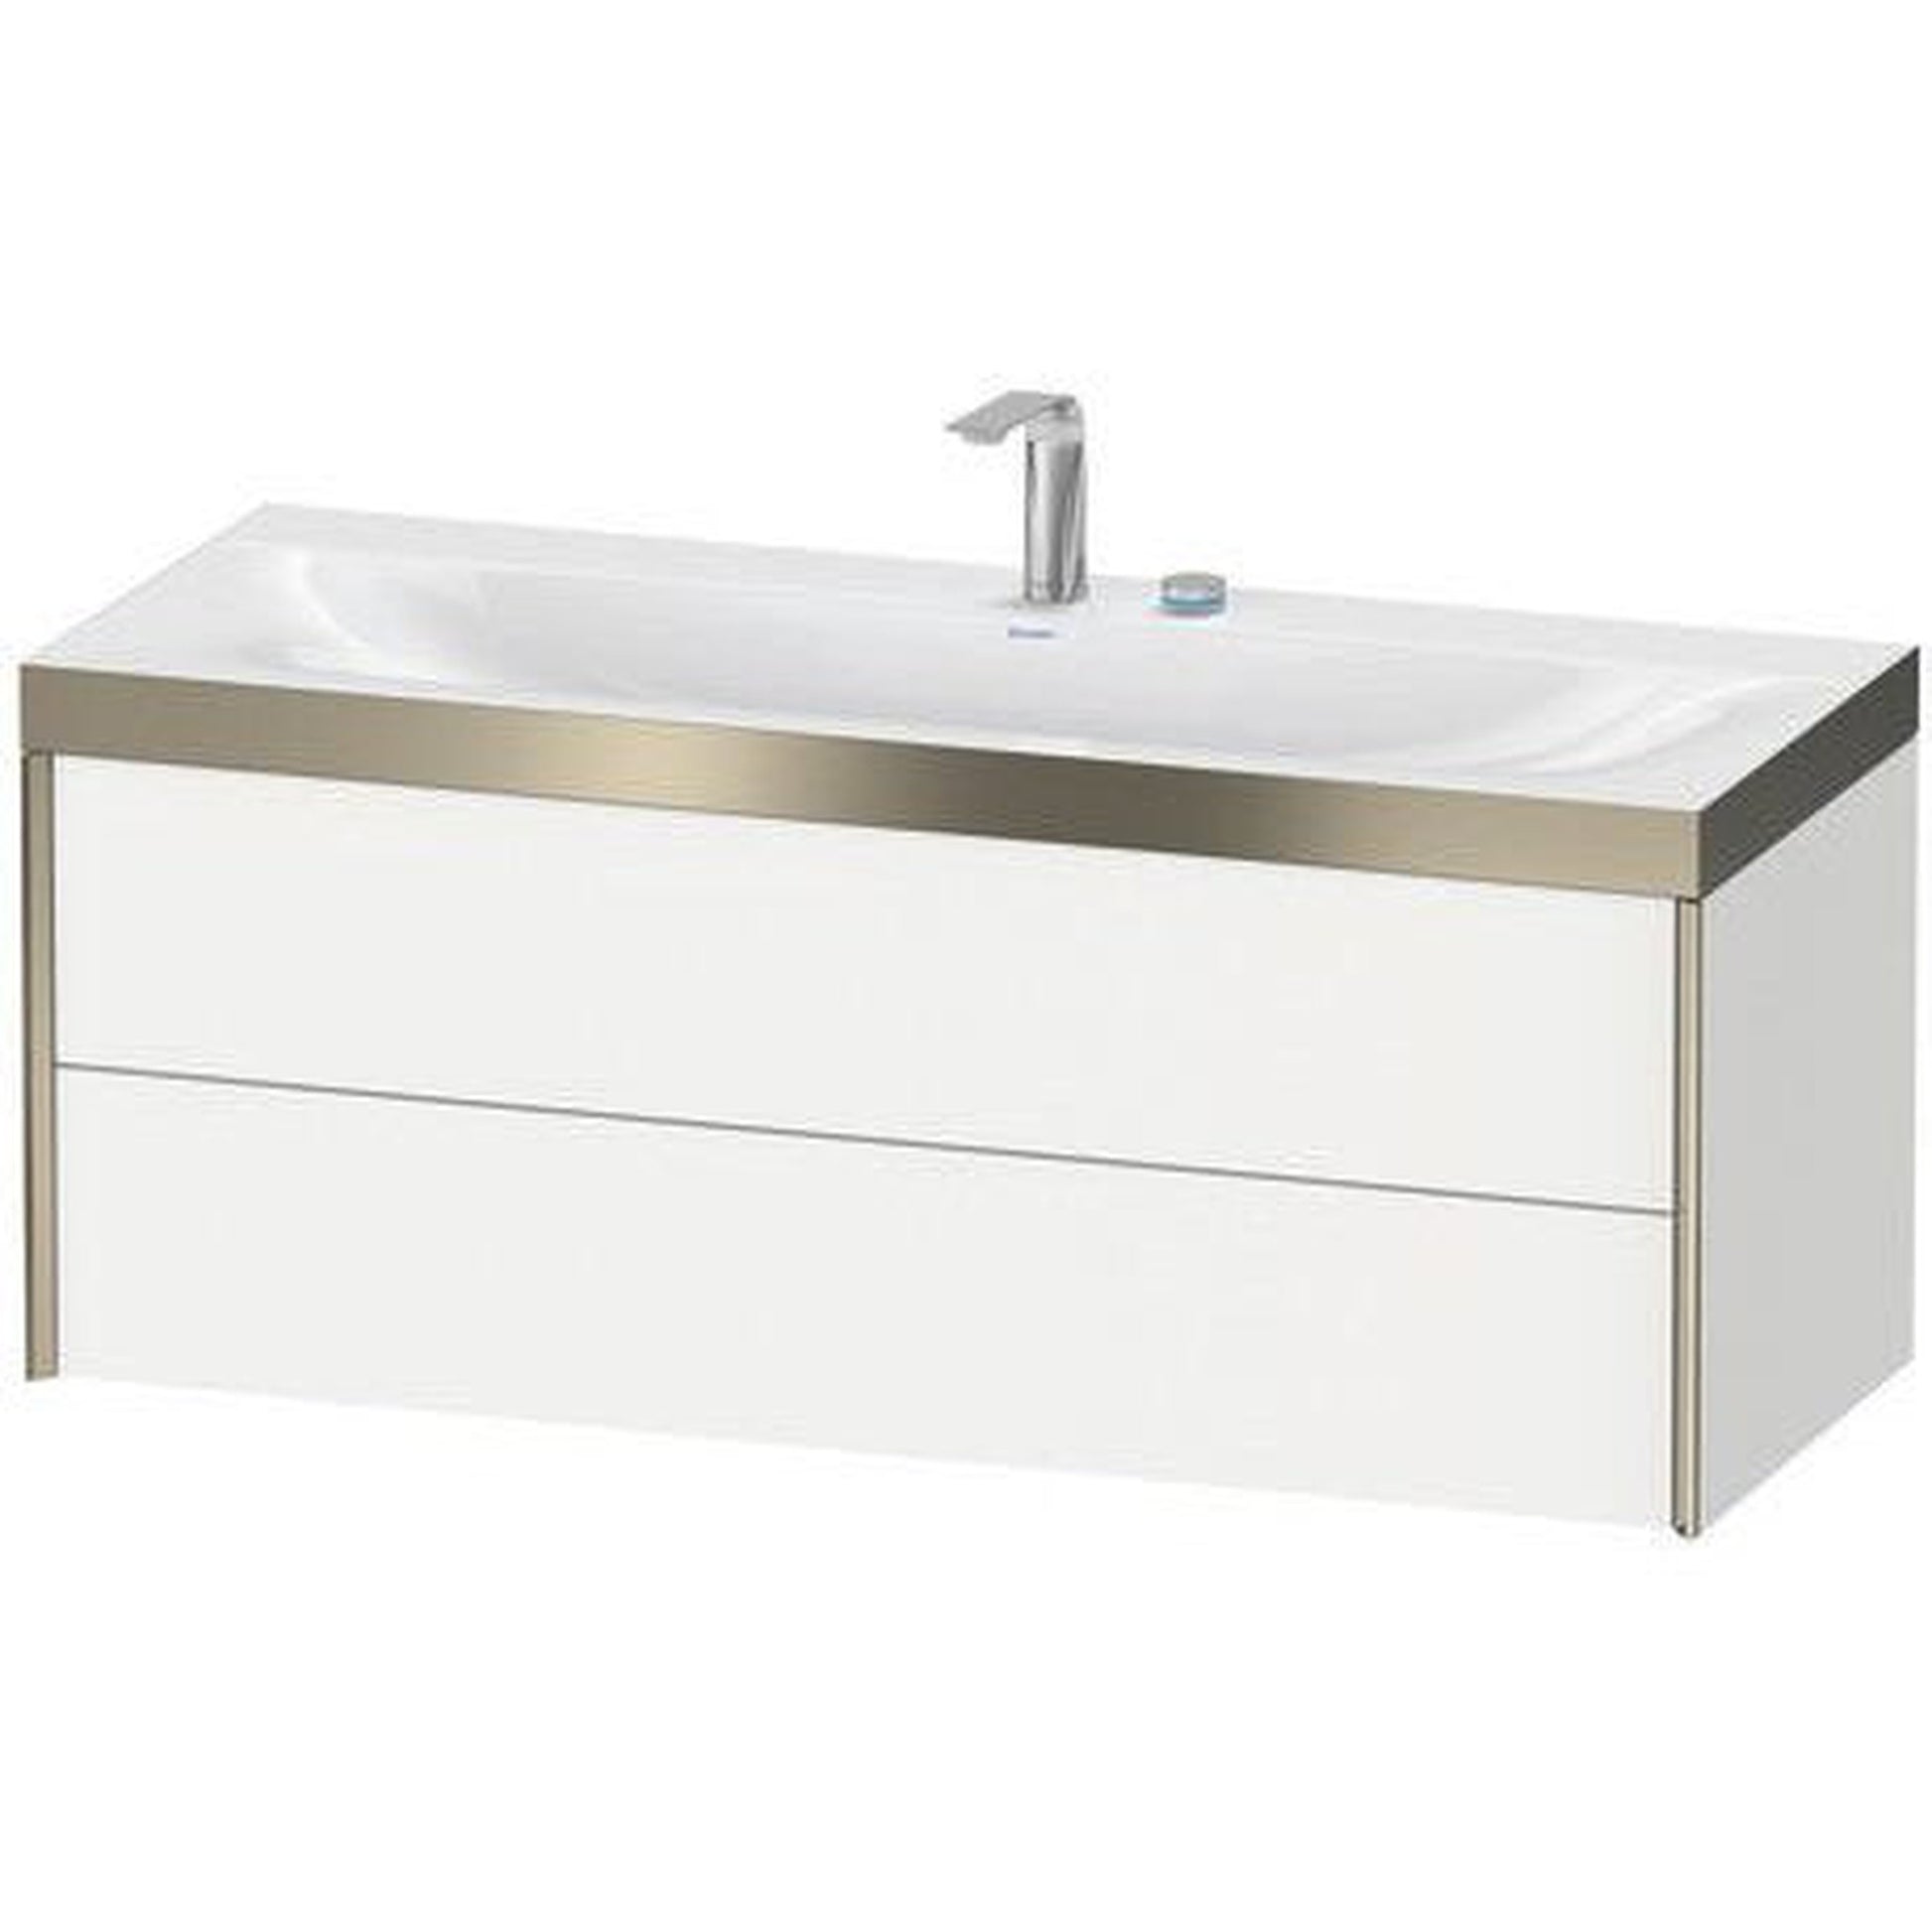 Duravit Xviu 47" x 20" x 19" Two Drawer C-Bonded Wall-Mount Vanity Kit With One Tap Hole, Dark Brushed Oak (XV4617OB172C)